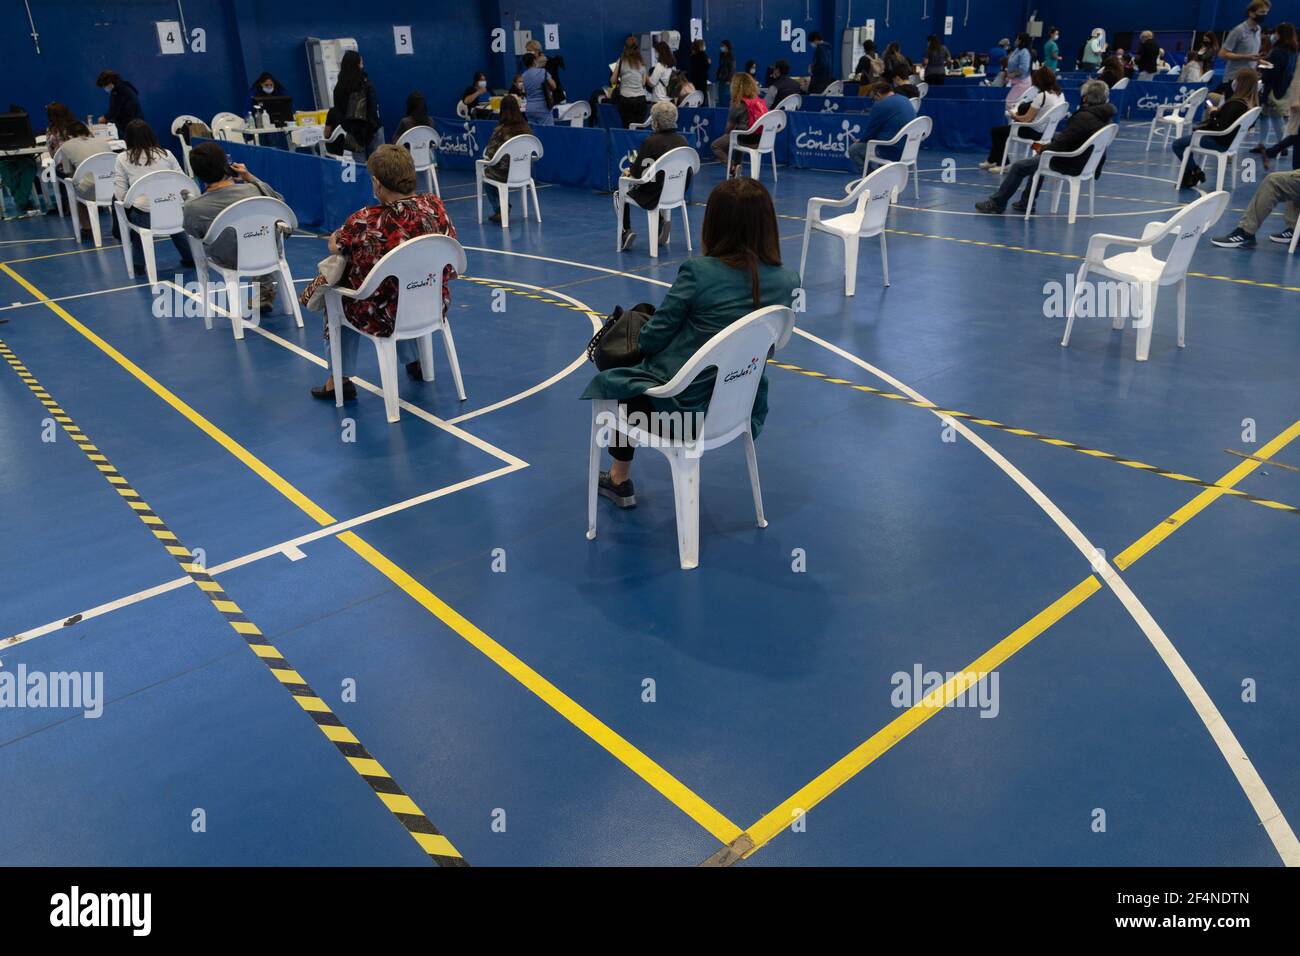 Santiago, Metropolitana, Chile. 22nd Mar, 2021. People wait to receive the dose of the Sinovac or Pfizer vaccine, in a municipal stadium transformed into a vaccination center against covid in Santiago, Chile. Credit: Matias Basualdo/ZUMA Wire/Alamy Live News Stock Photo